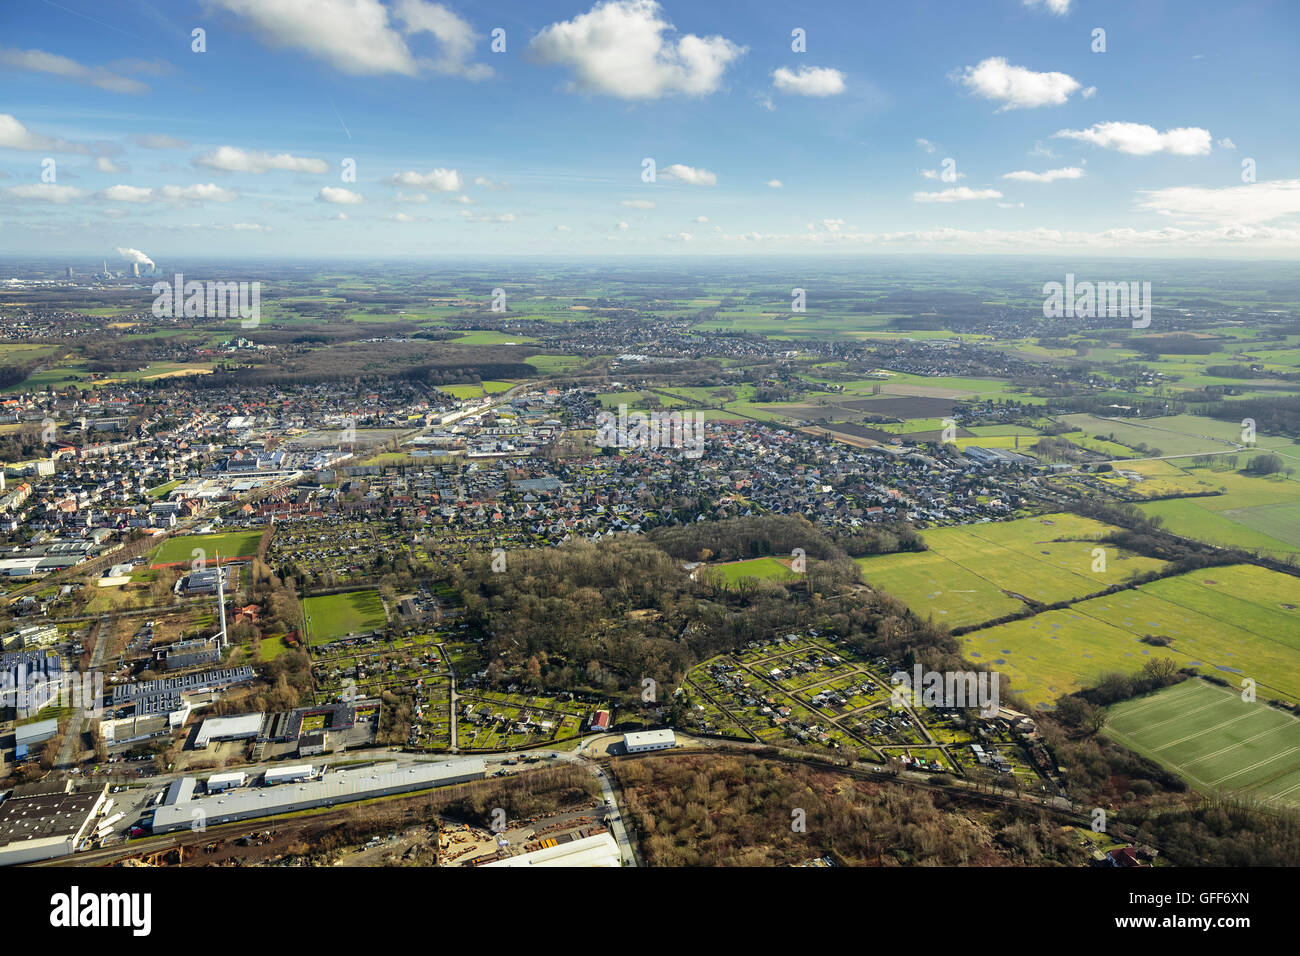 Air, Animal park Hamm, winter pictures, Hamm, Ruhr area, North Rhine Westphalia, Germany, Europe, Aerial view, birds-eyes view, Stock Photo